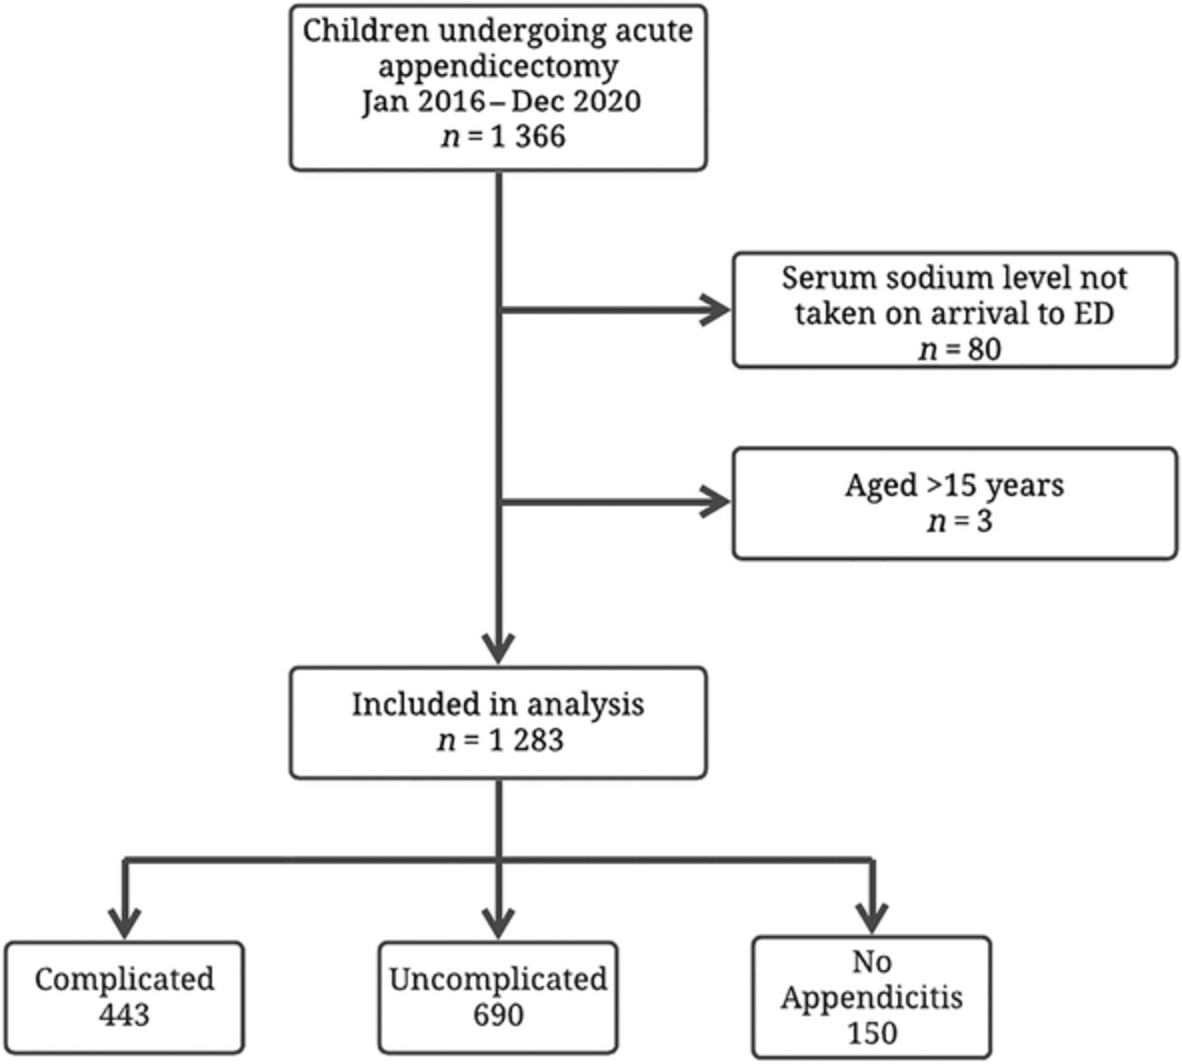 Hyponatremia an indicator of complicated appendicitis in children: Starship experience